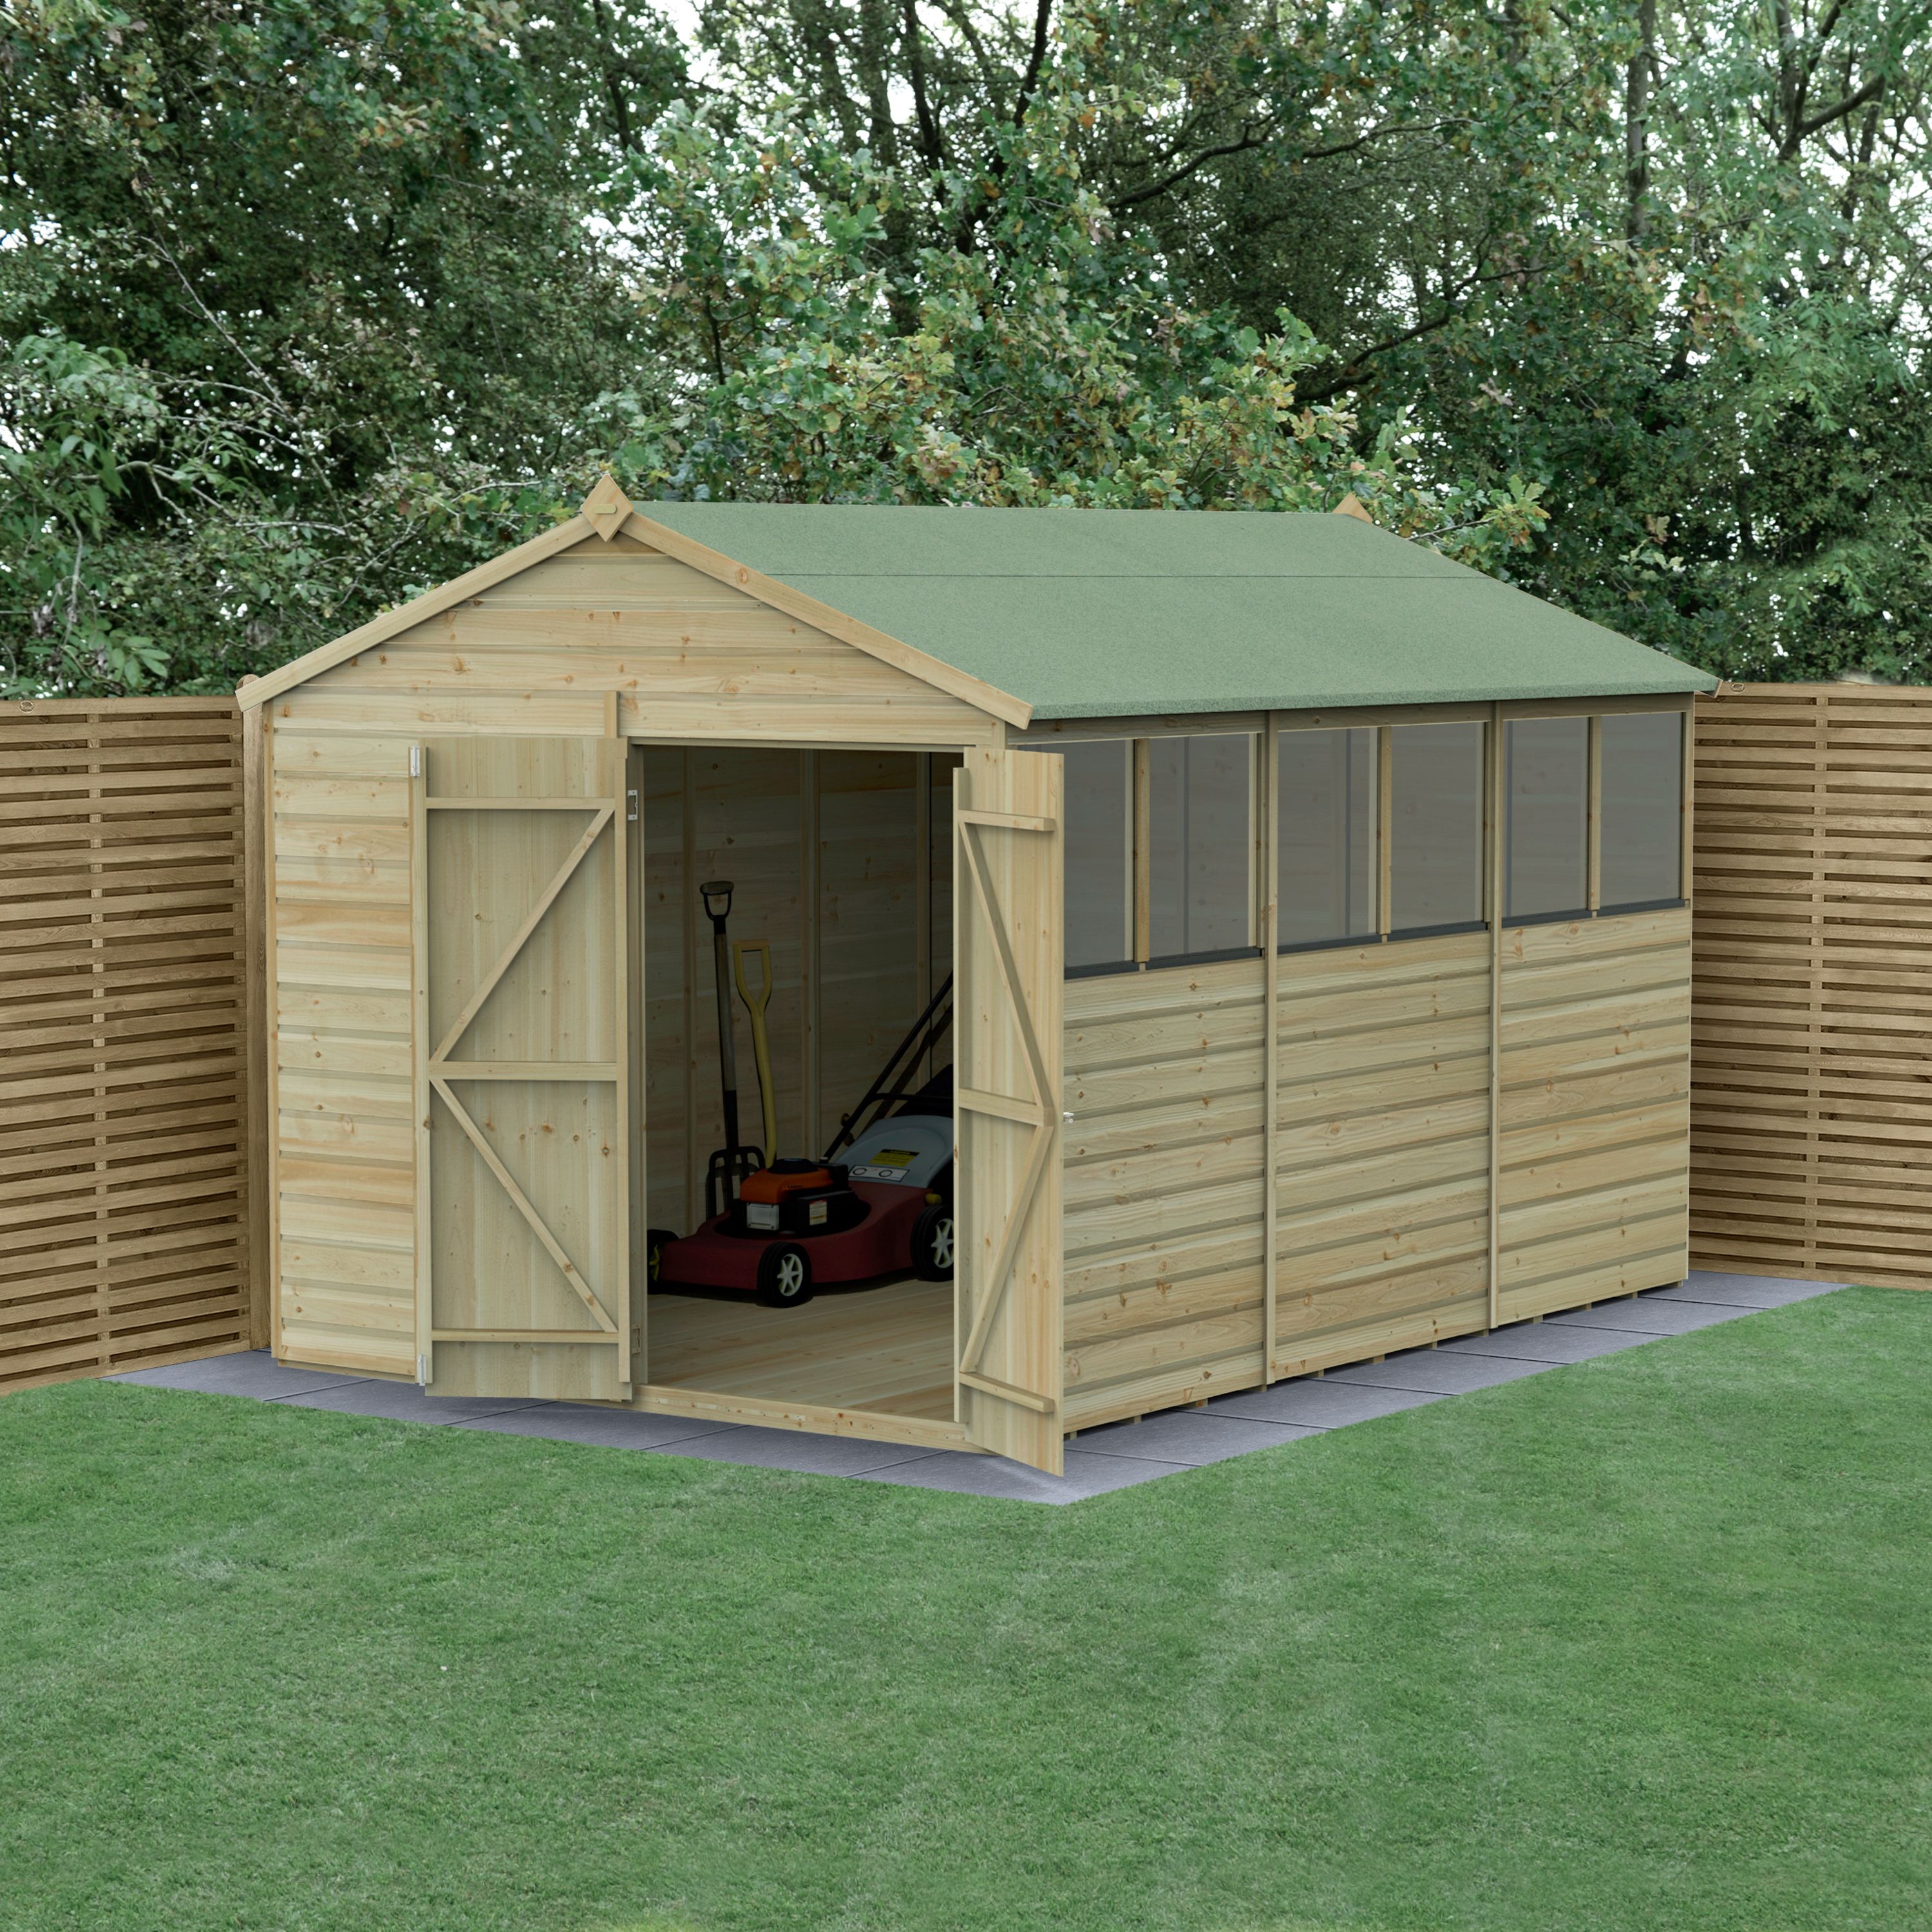 Forest Garden Beckwood 12x8 ft Apex Natural timber Wooden 2 door Shed with floor & 6 windows (Base included) - Assembly not required